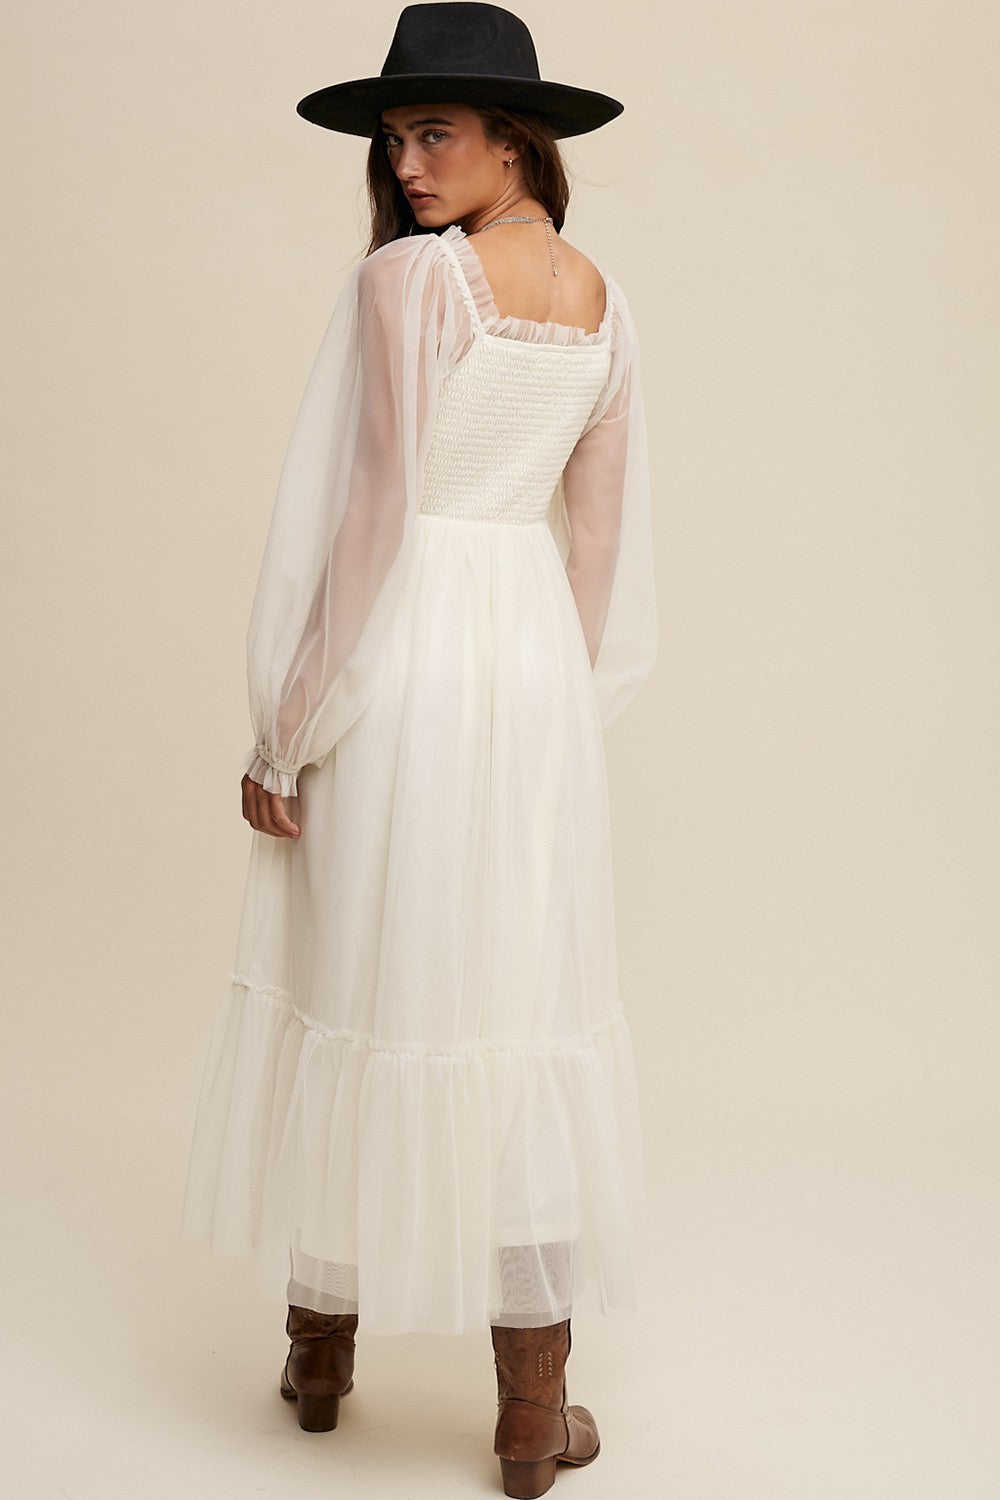 This Love Tulle Dress